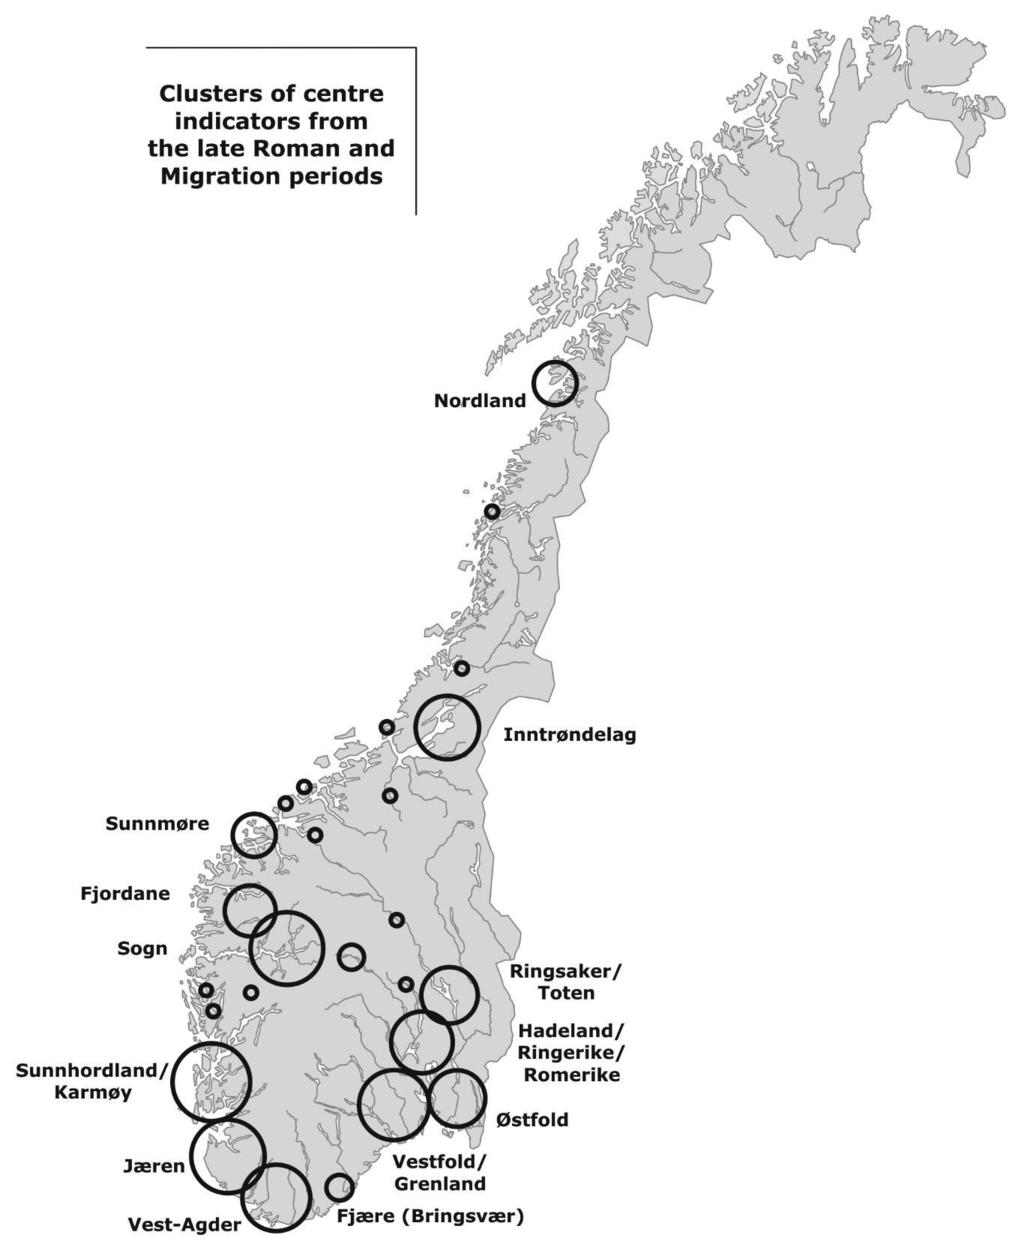 Fig. 8.2. Clusters of selected centre indicators from the late Roman and Migration periods in Norway.